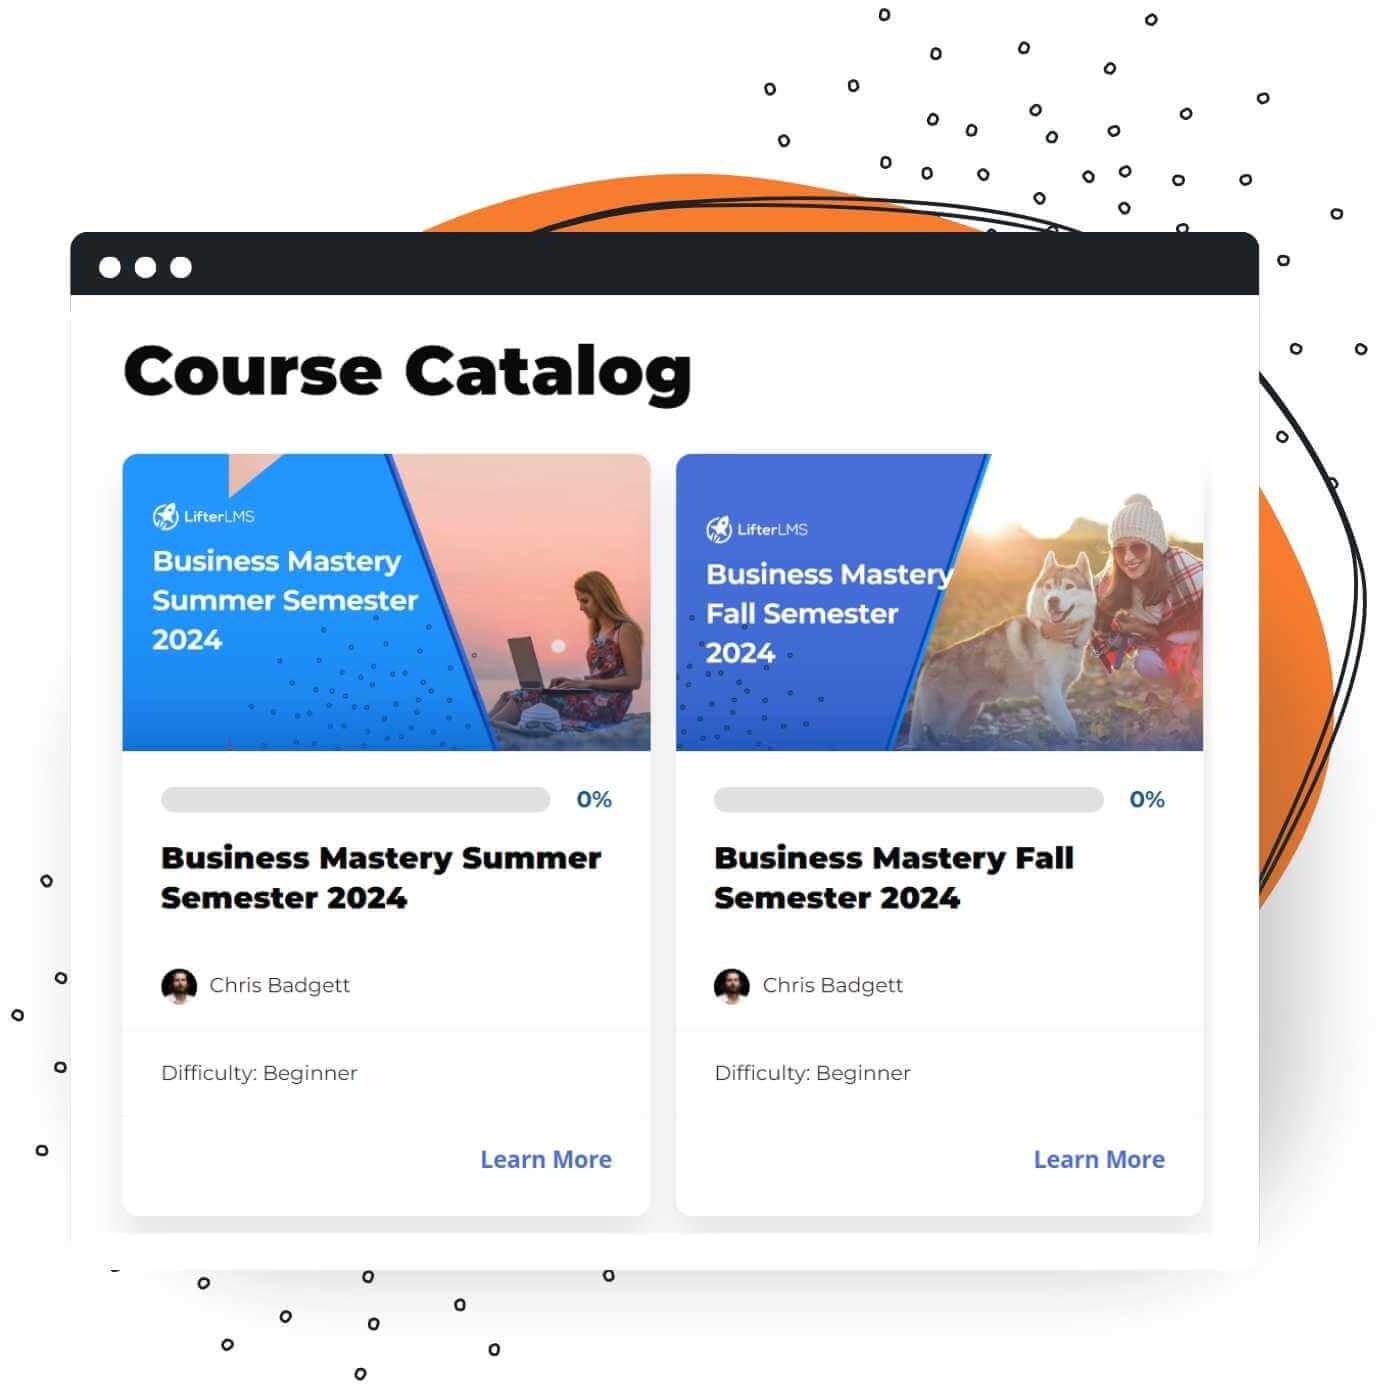 Screnshot of the Course Catalog in LifterLMS with Cohort courses for different semesters